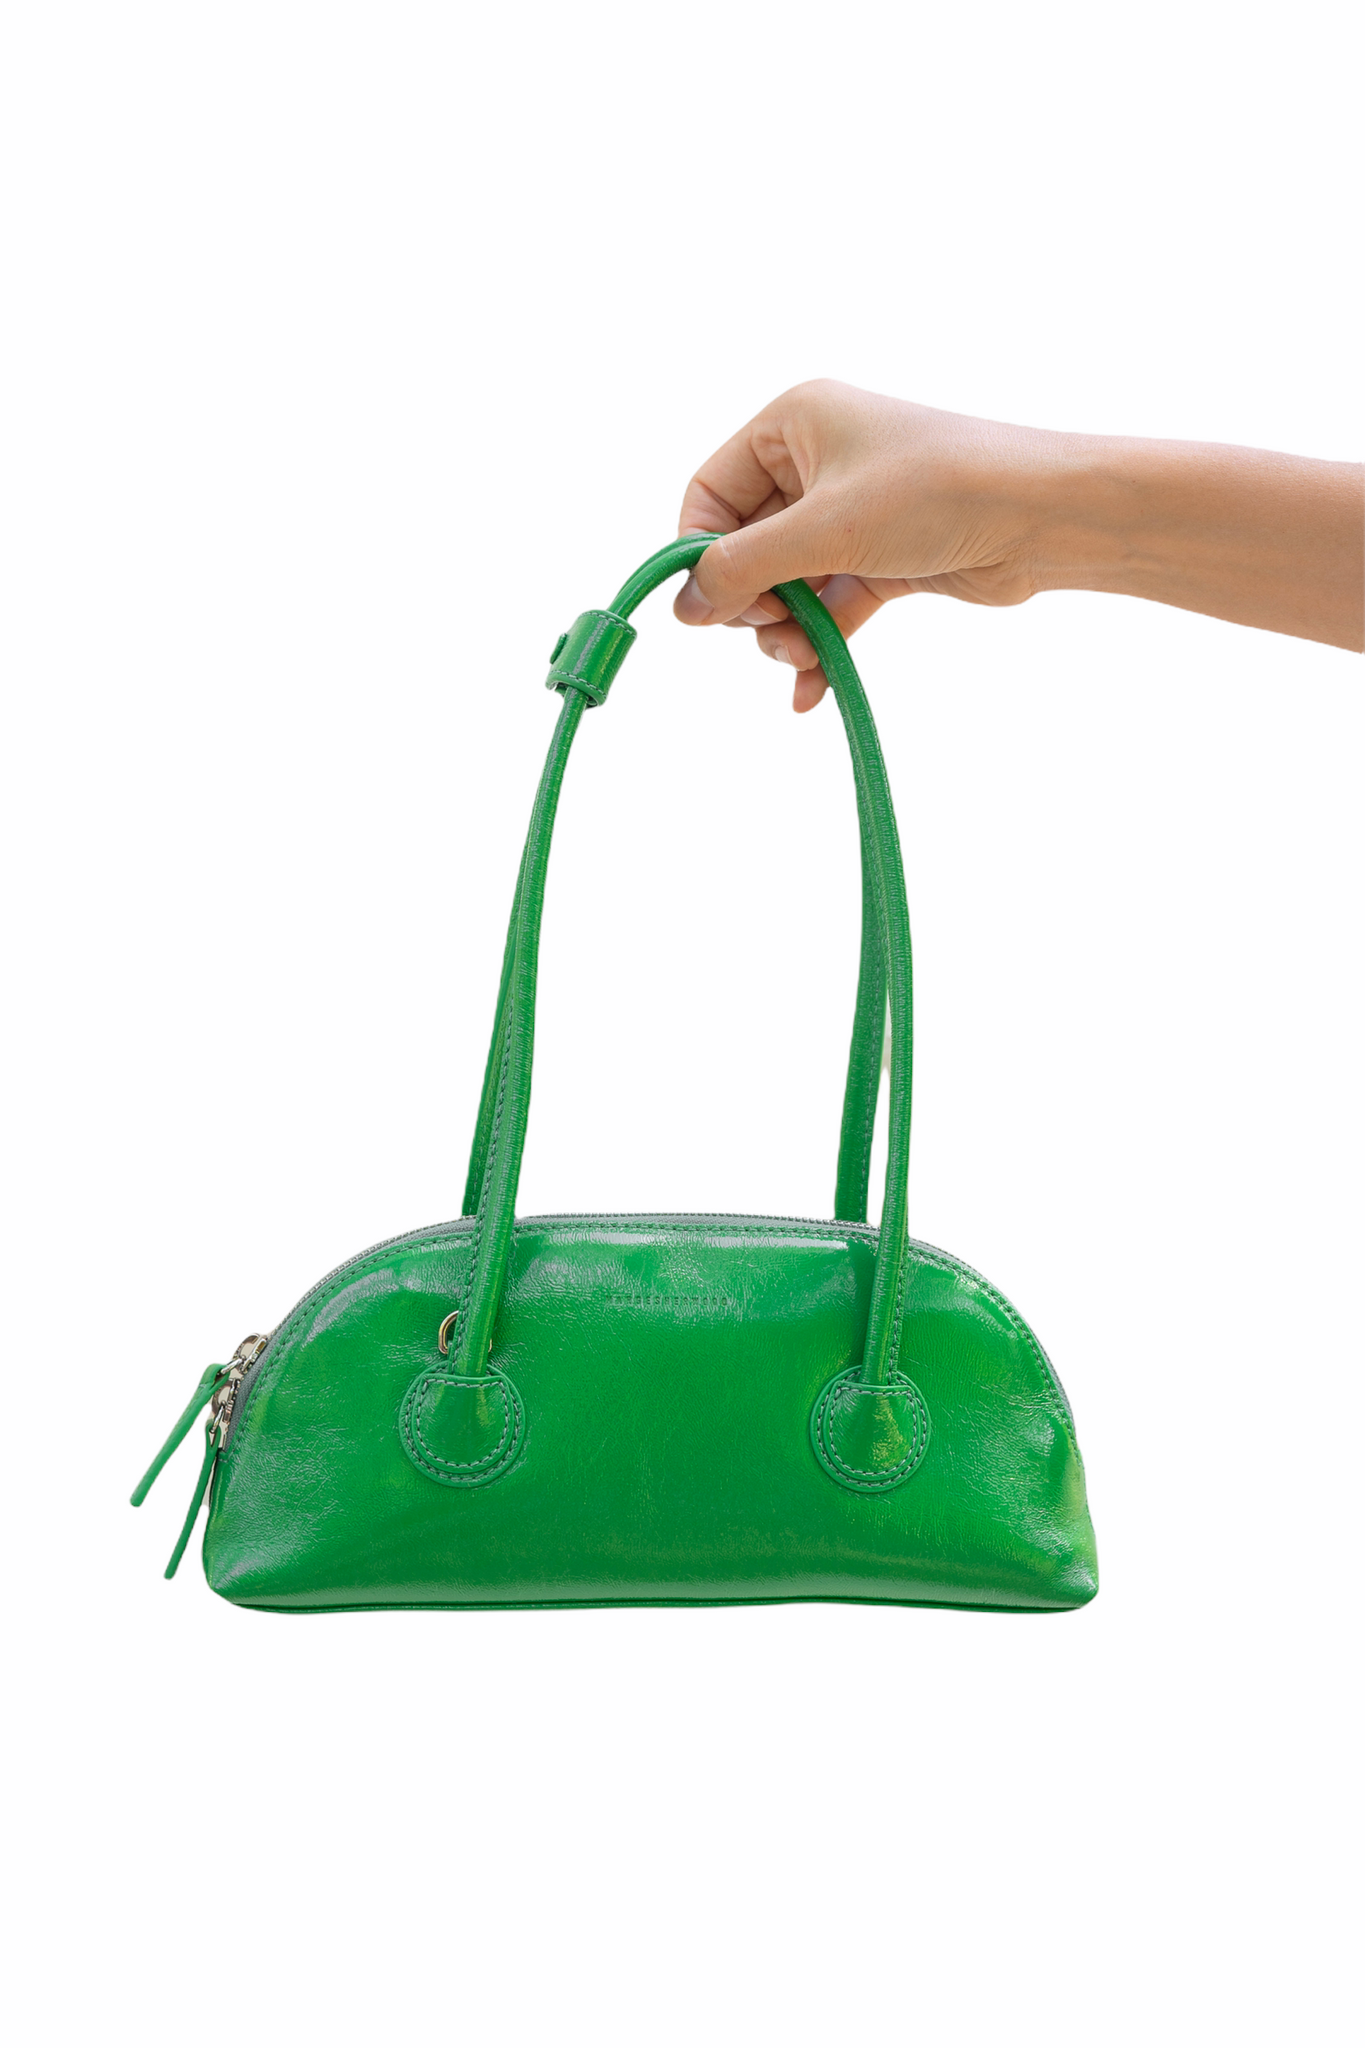 BESSETTE BAG W/ CROSS STRAP IN GREEN PATENT BY MARGESHERWOOD